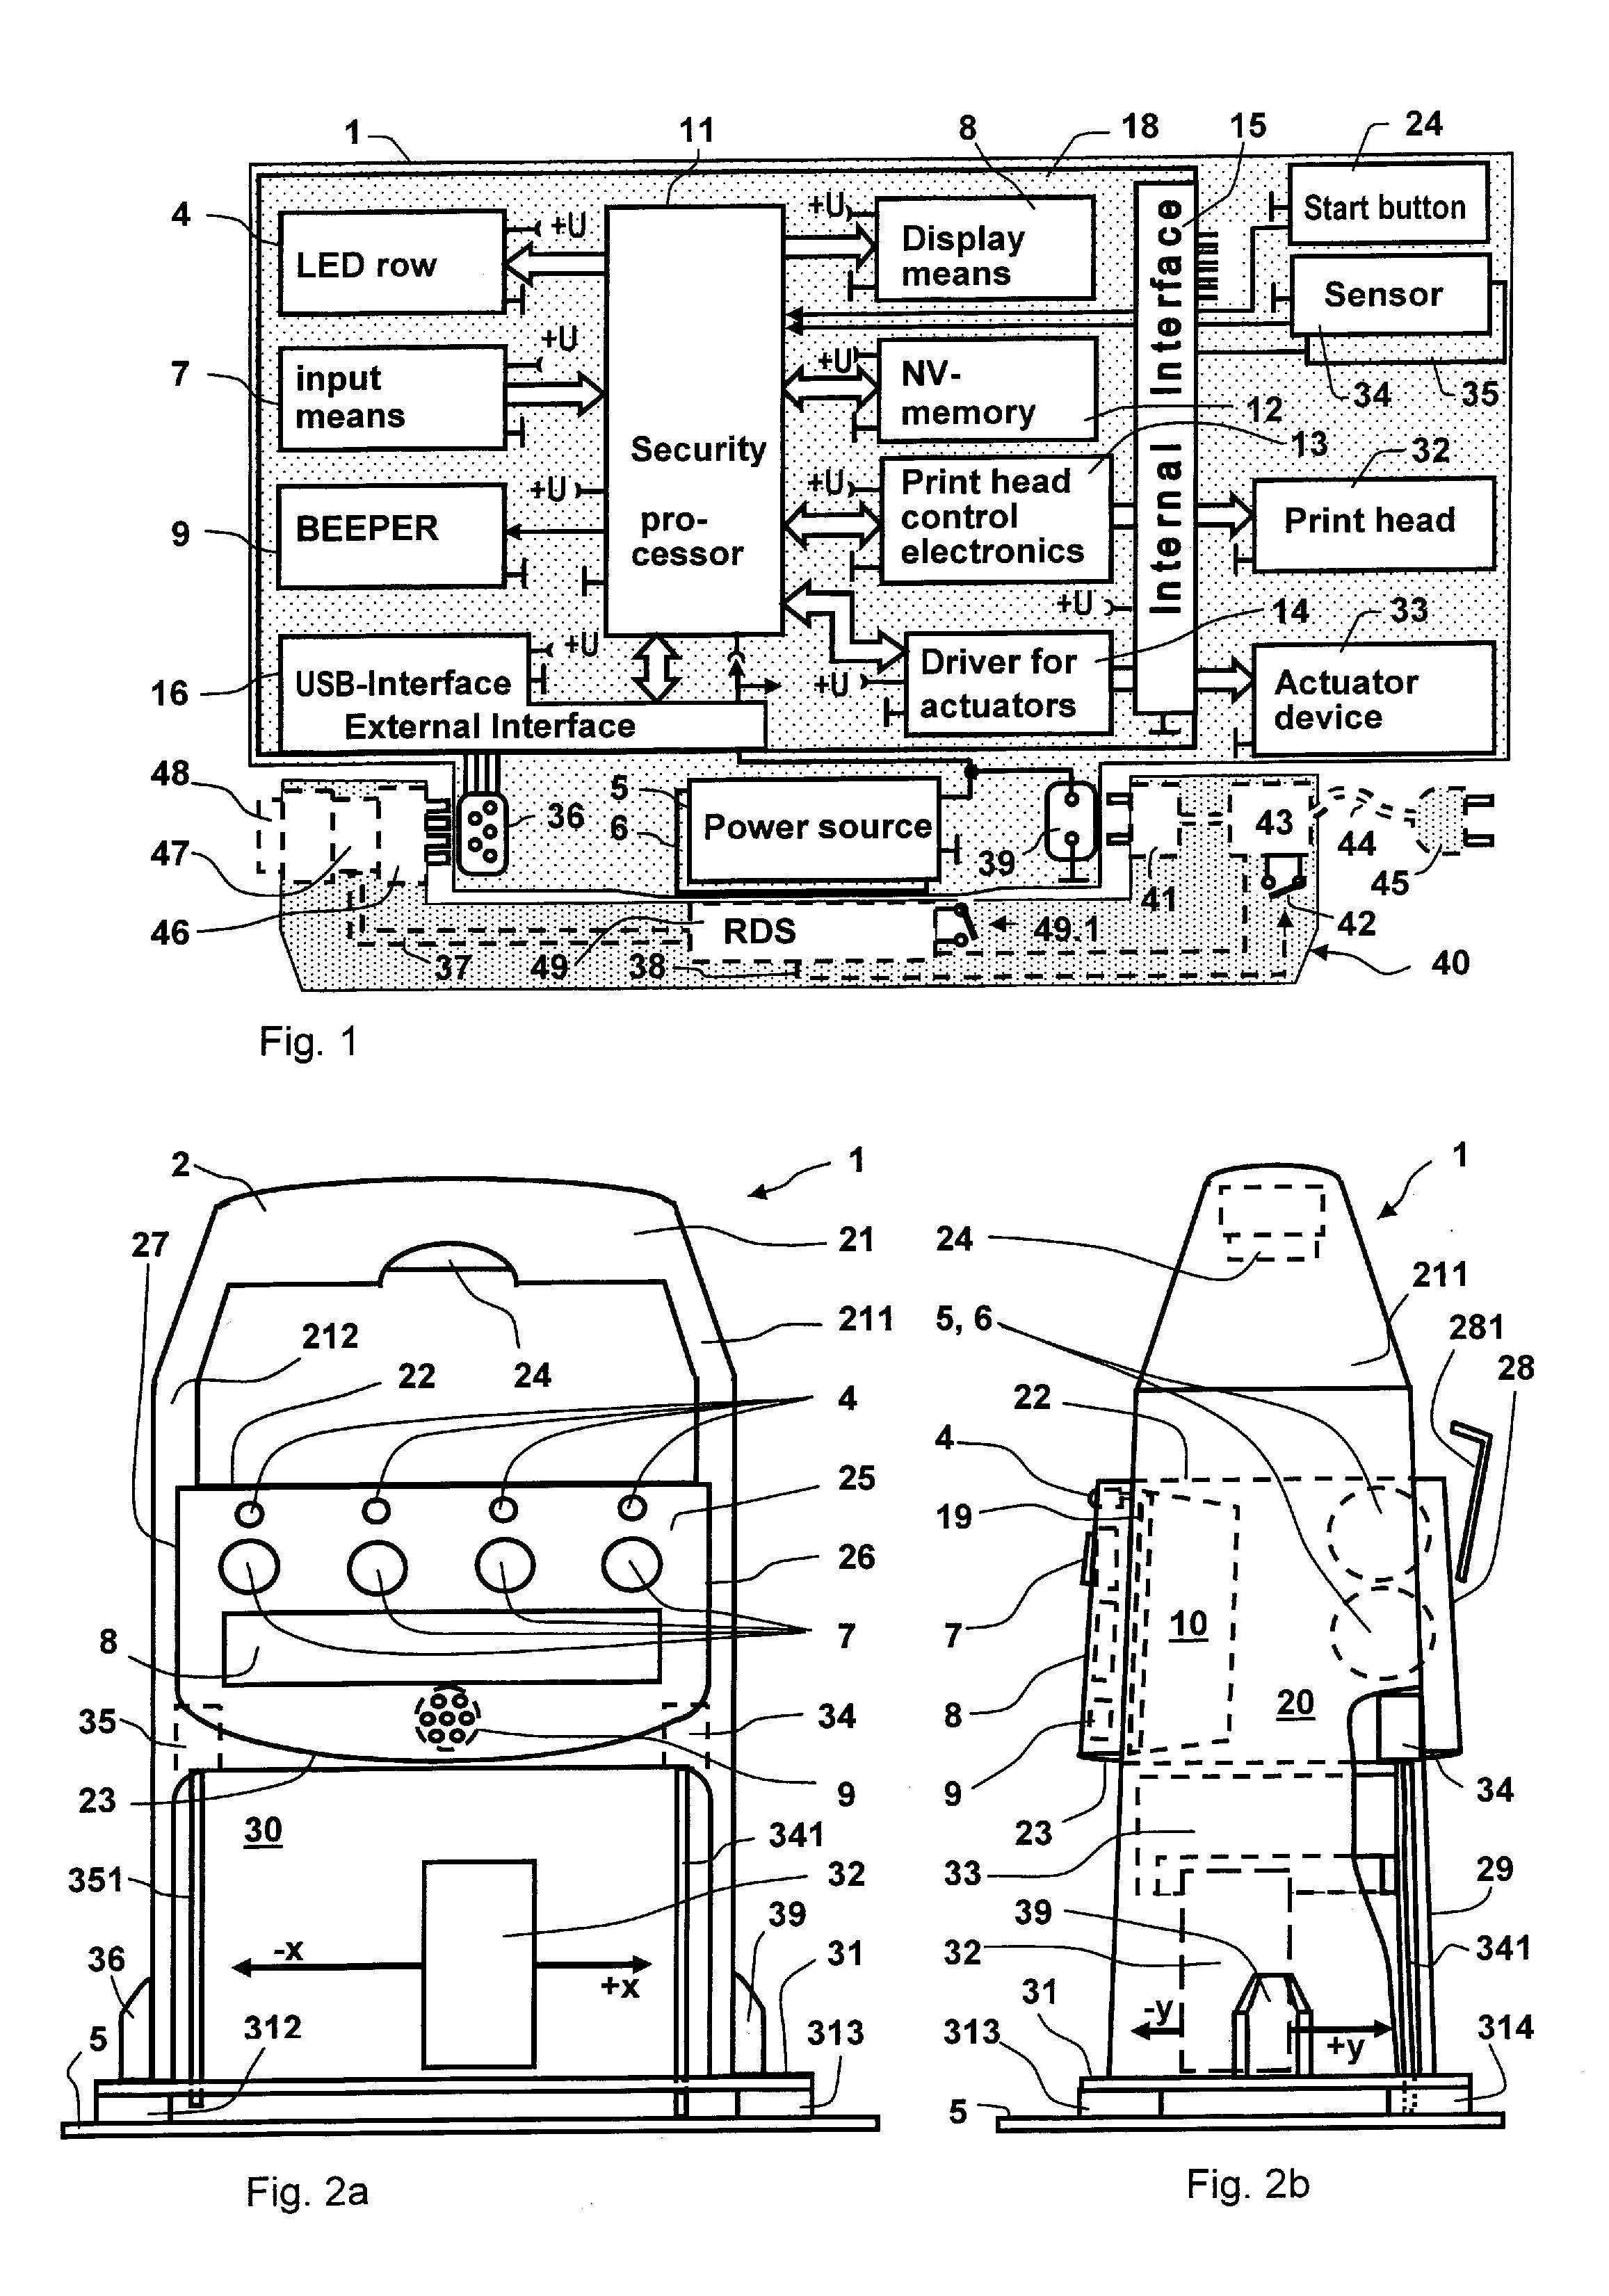 Universally usable electronic manual stamping device